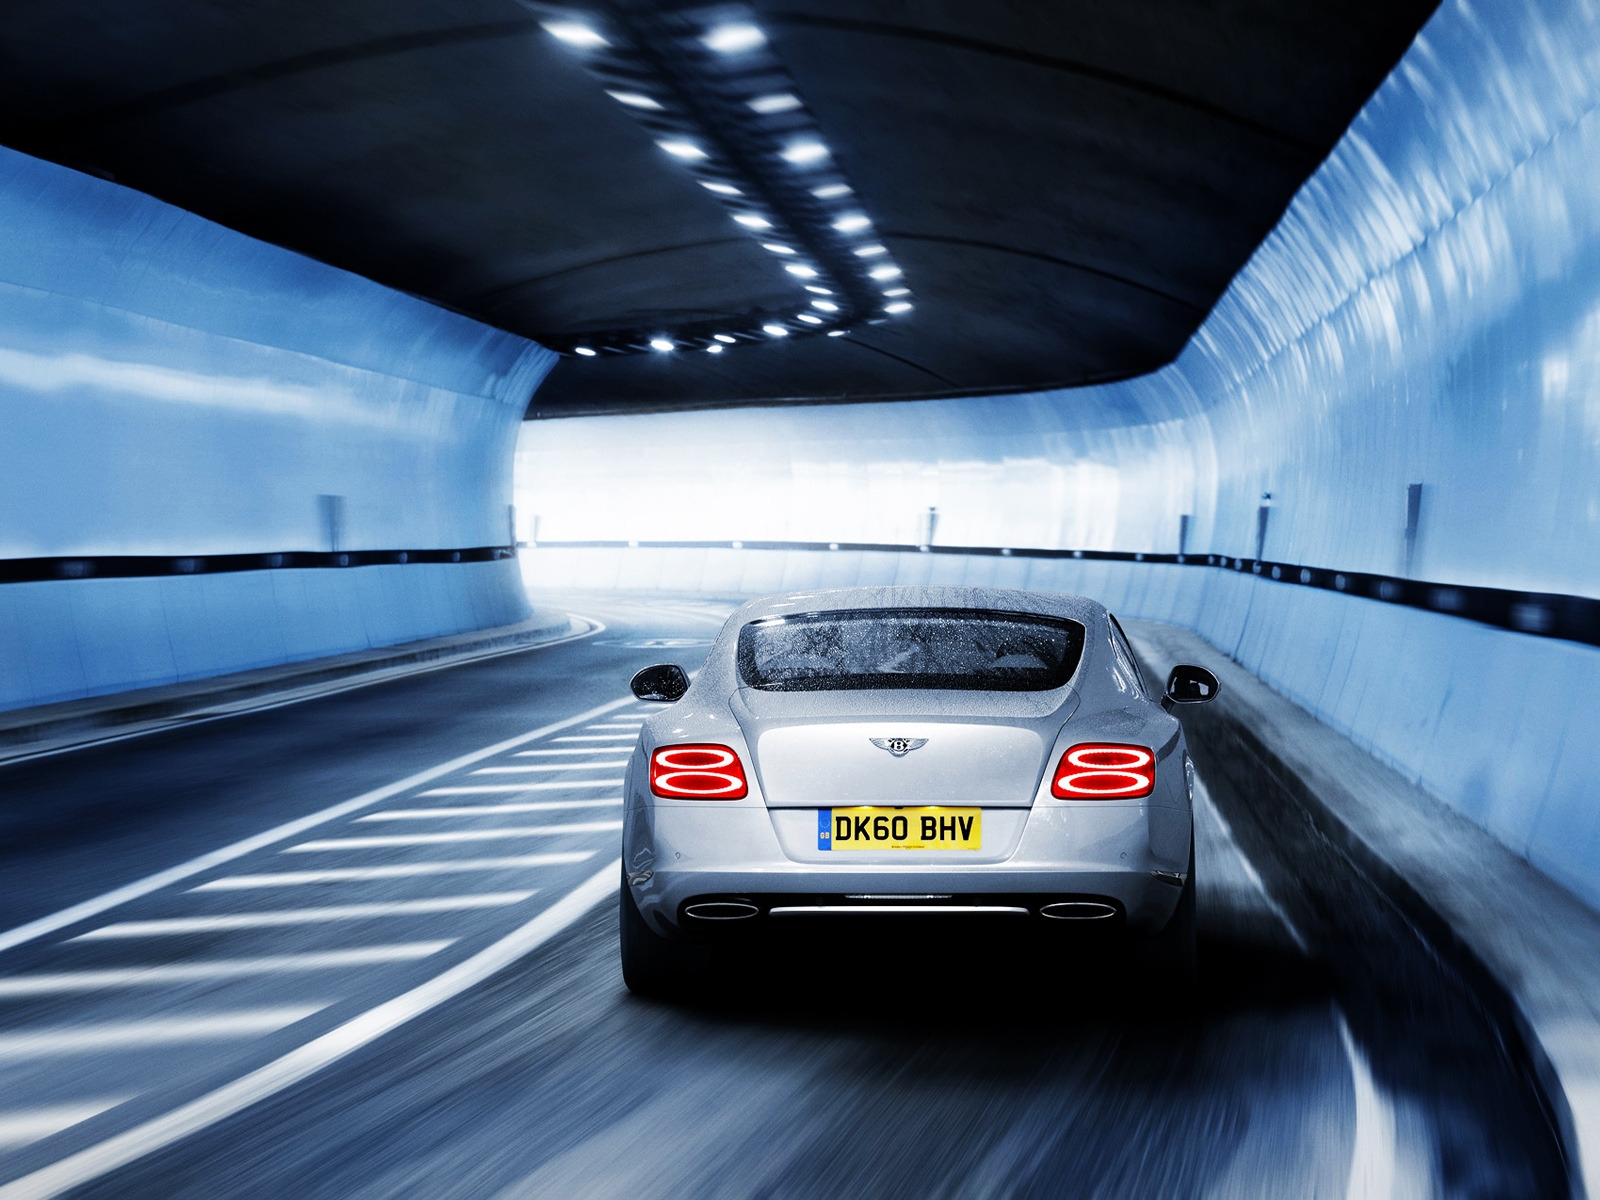 2011 Bentley Continental GT Rear for 1600 x 1200 resolution